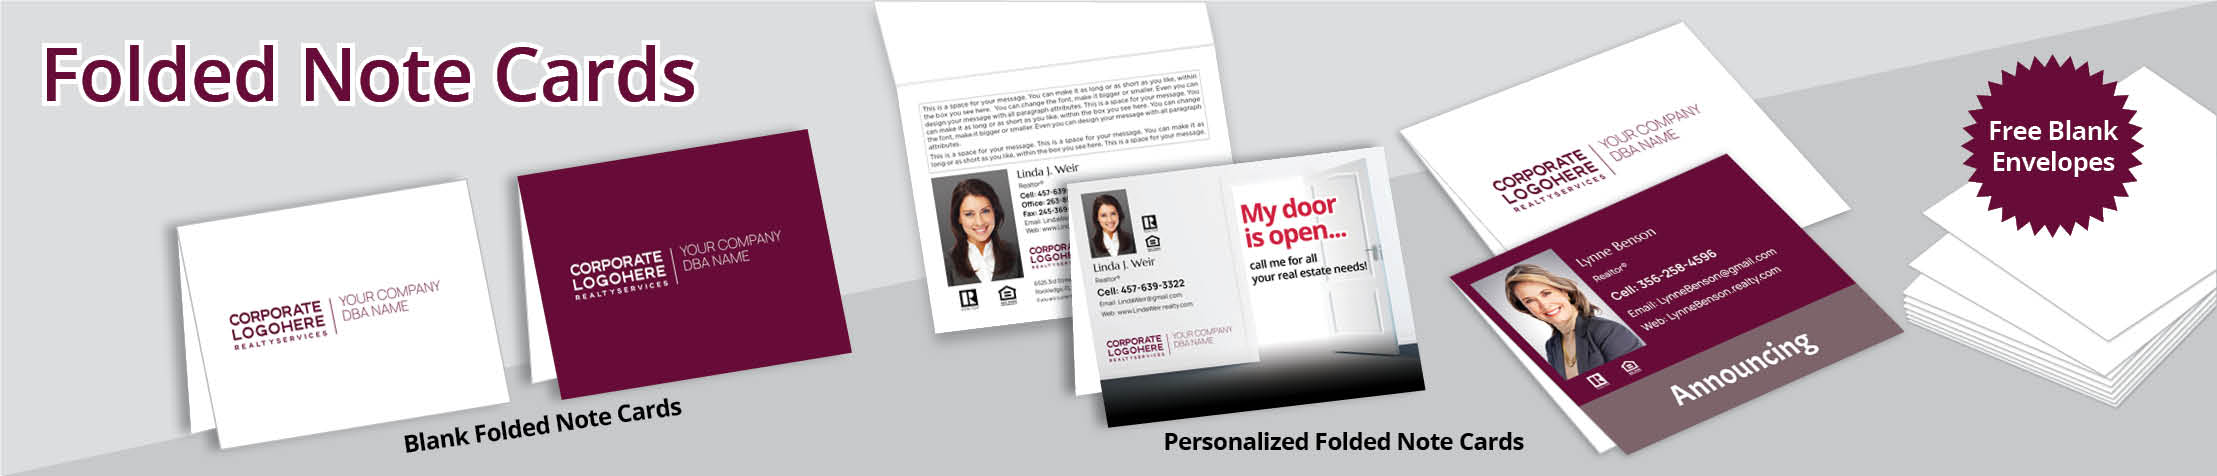 Berkshire Hathaway Real Estate Postcards -  postcard templates and direct mail postcard mailing services | BestPrintBuy.com